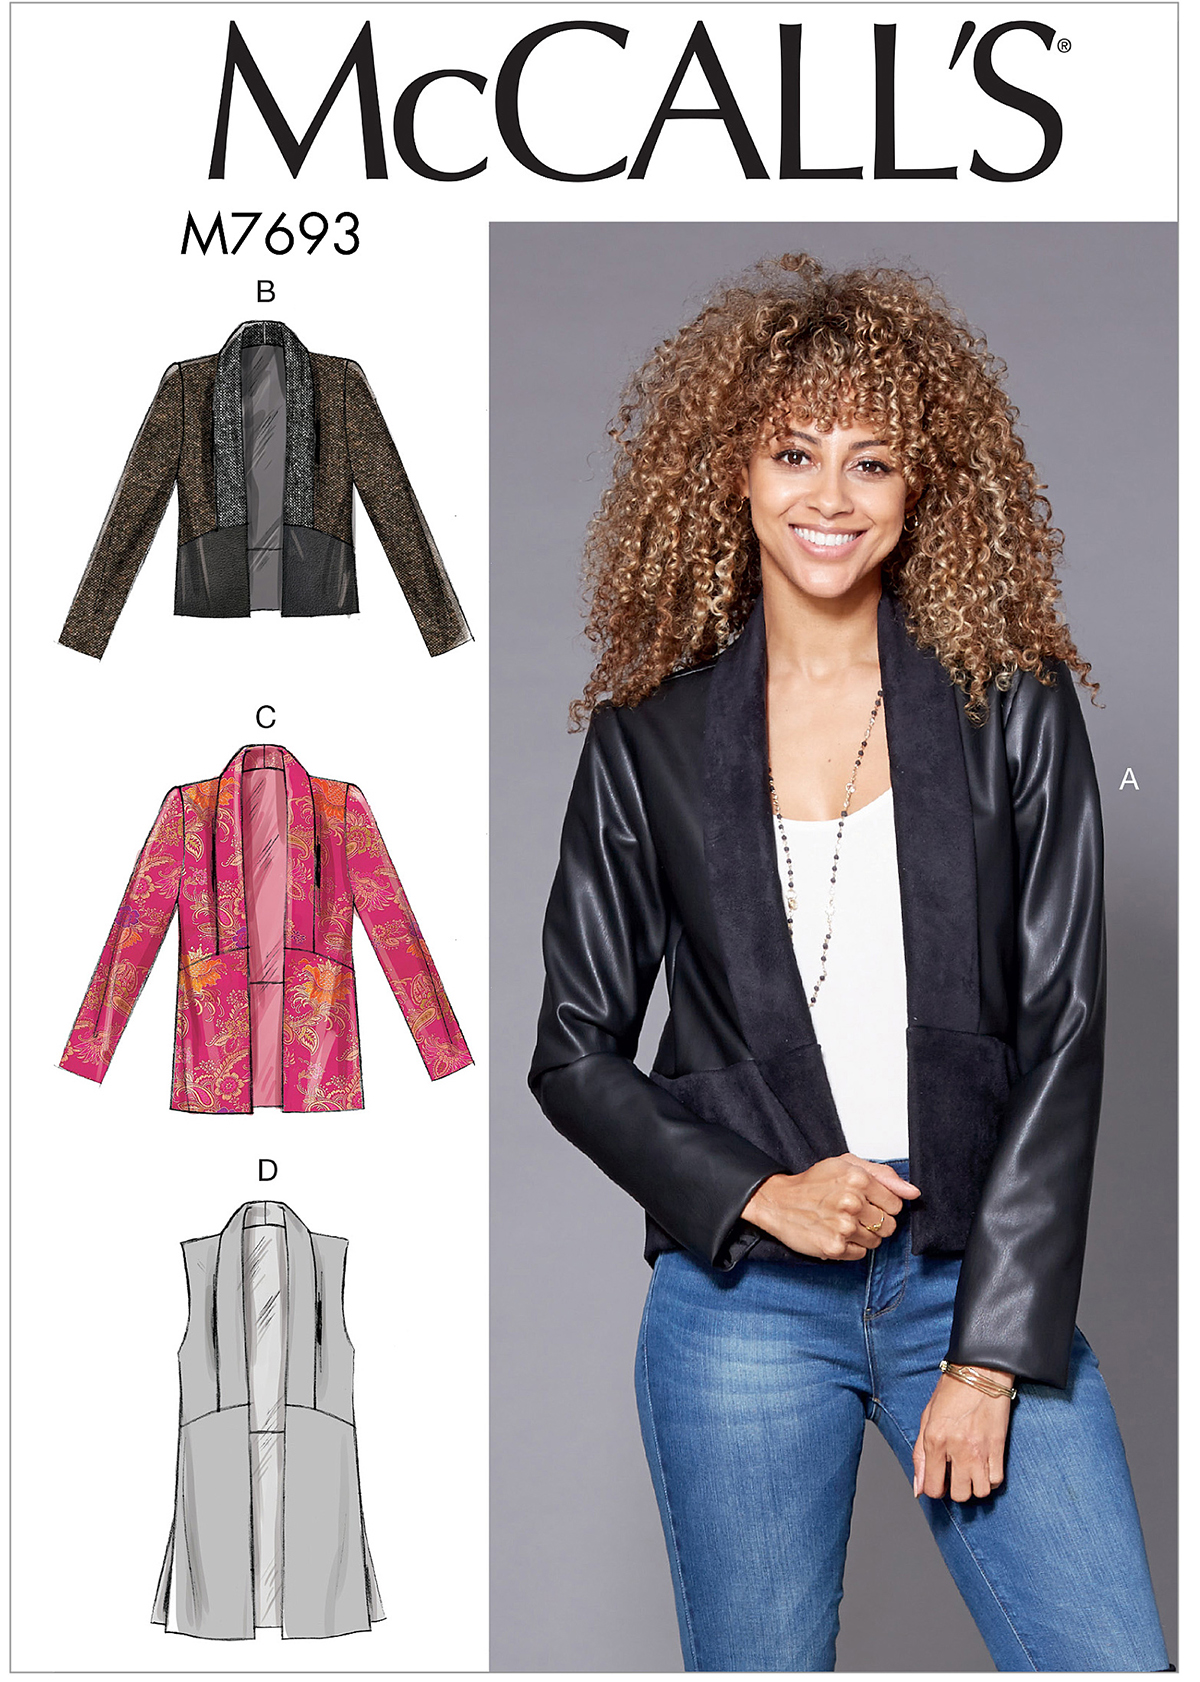 McCall's 7693 Misses' Shawl Collar Vest and Jackets